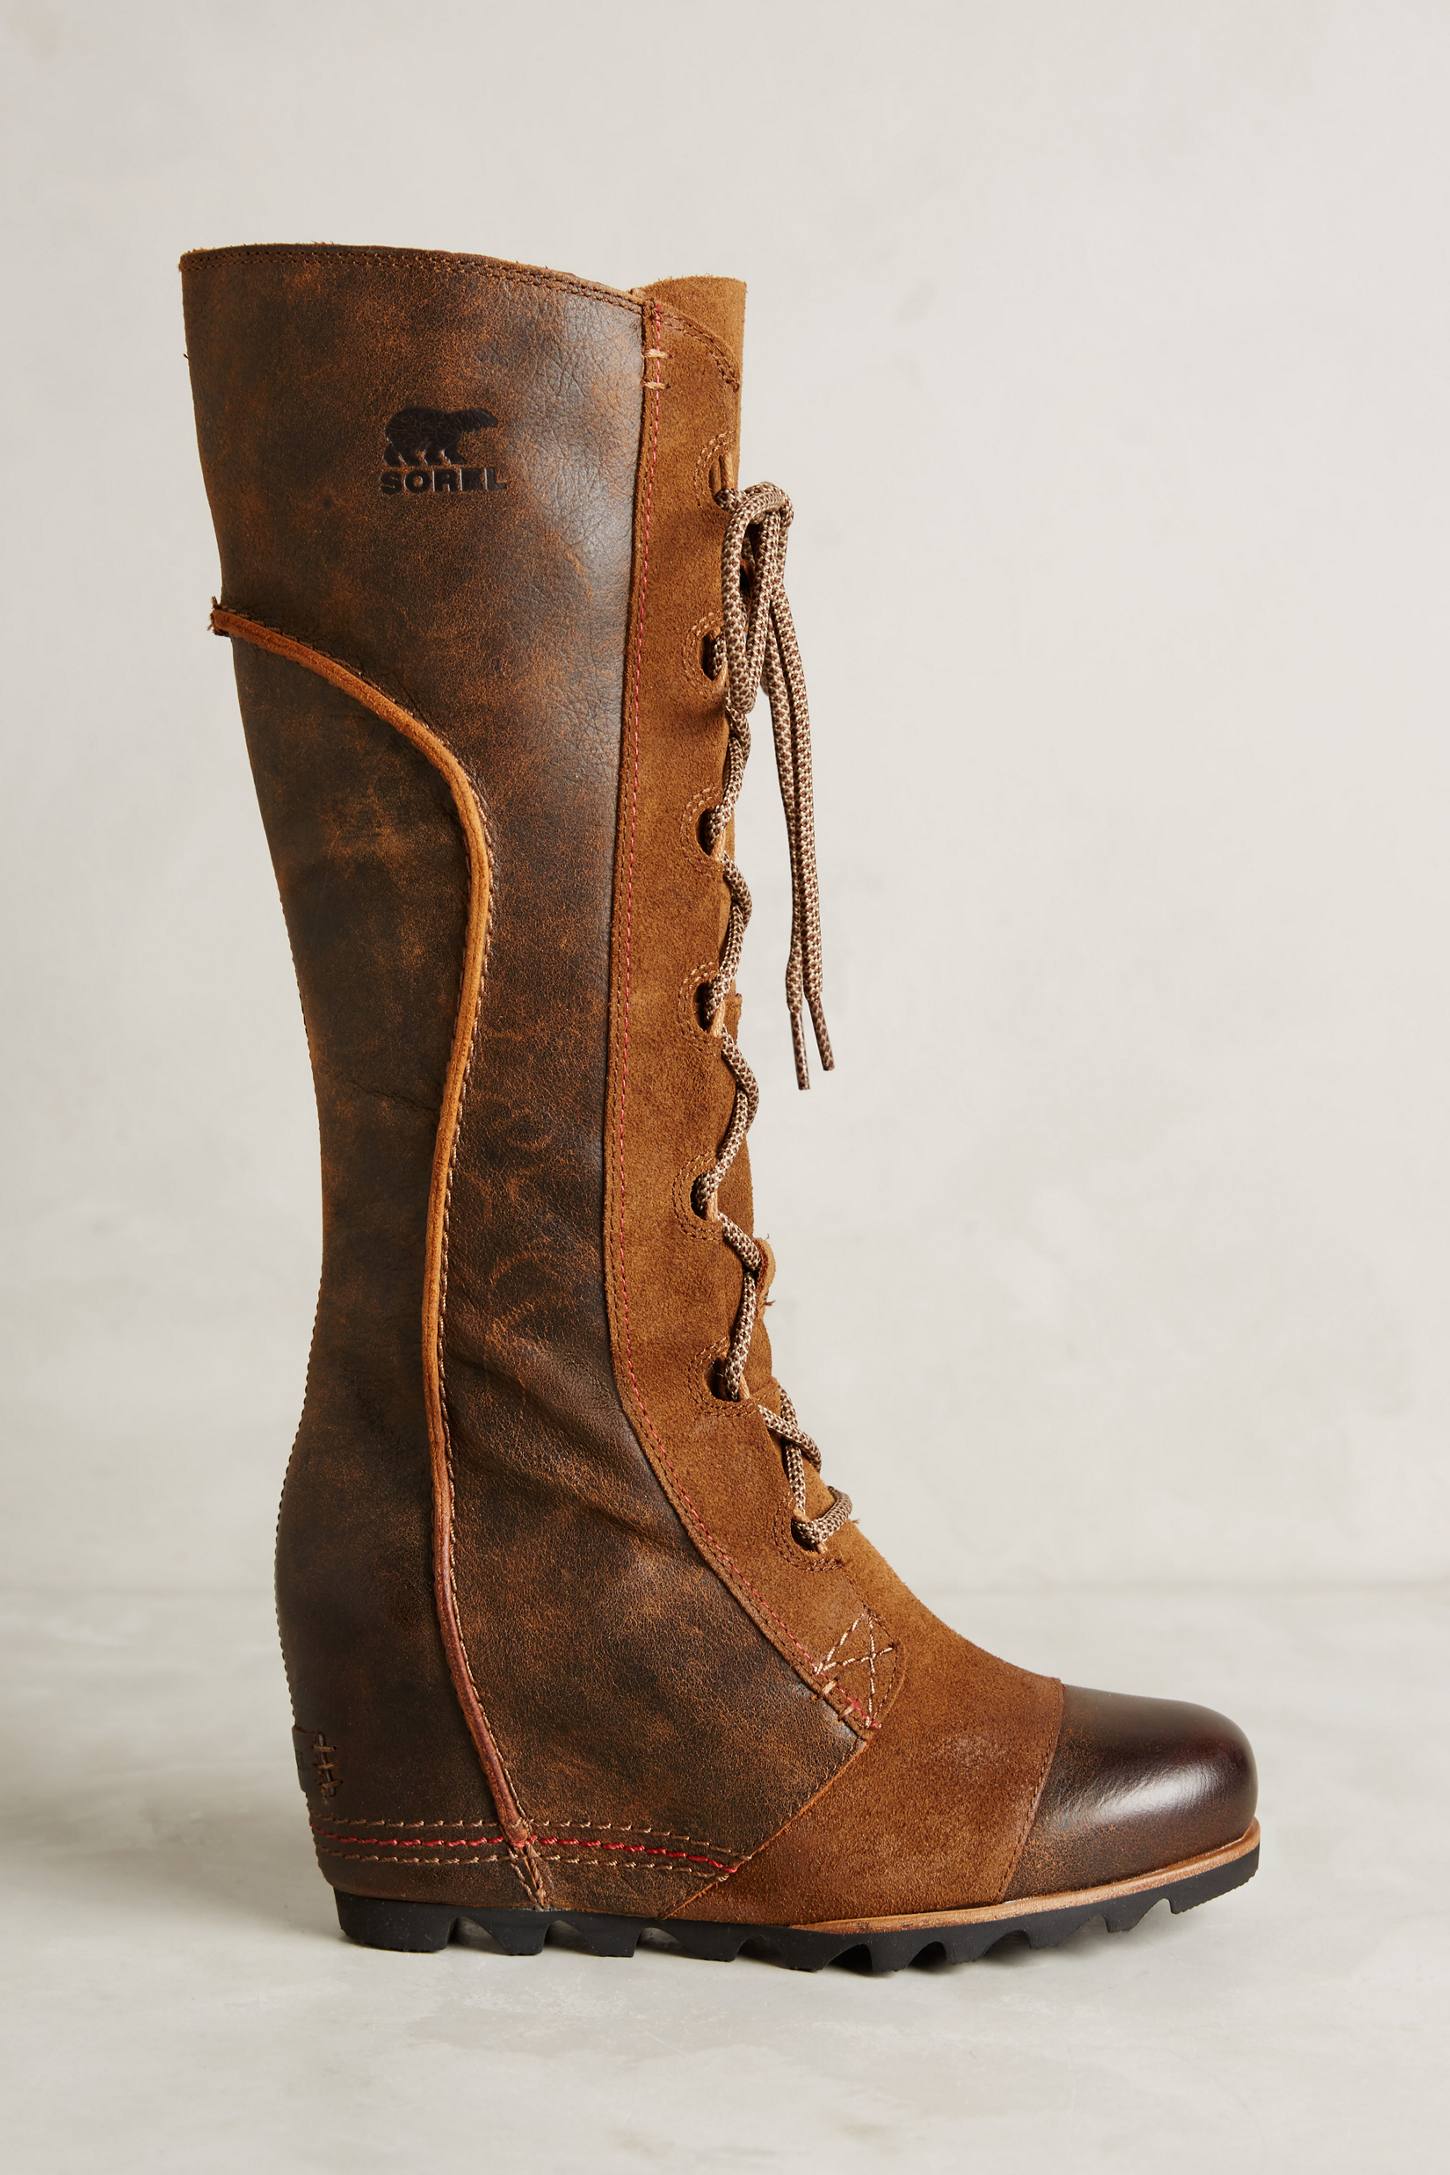 Sorel Cate The Great Wedge Boots